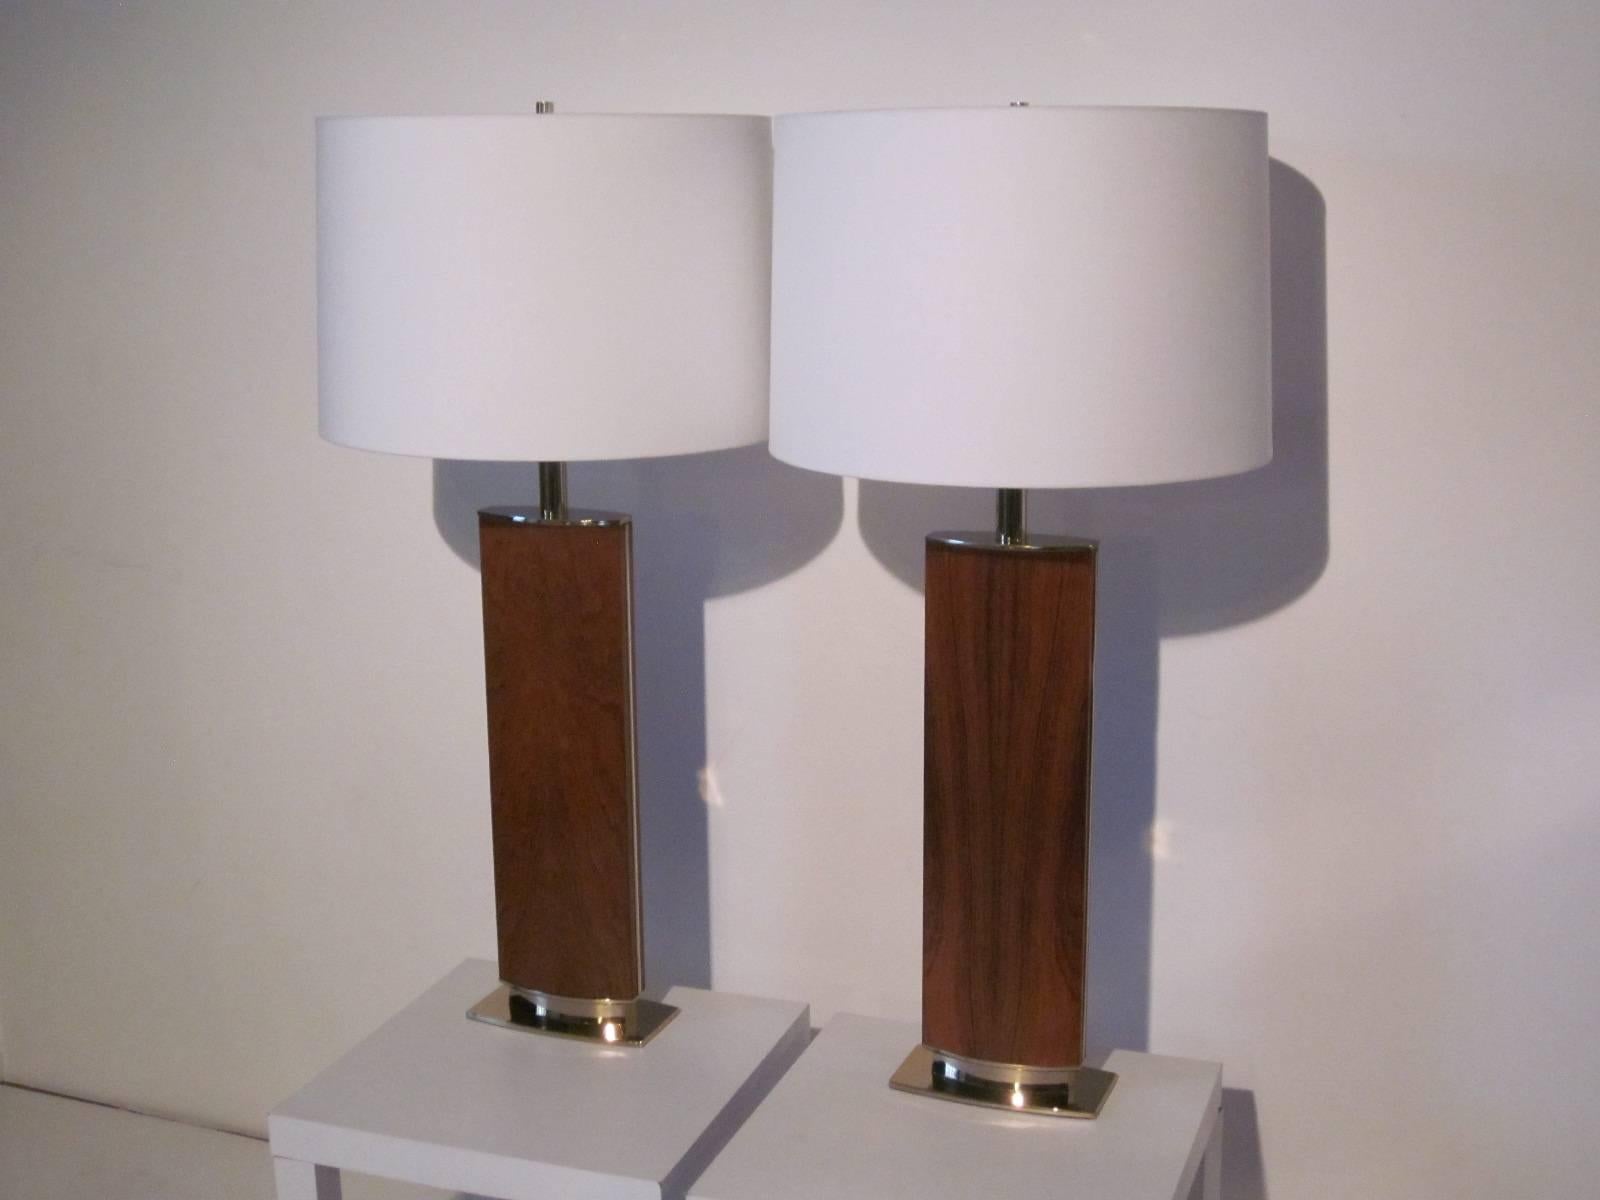 A pair of rosewood bodied table lamps with brass bases, shafts and brass inlaid detail side trim topped with linen shades, well made and heavy manufactured by the Stiffel lamp company. The shade dia. is 19